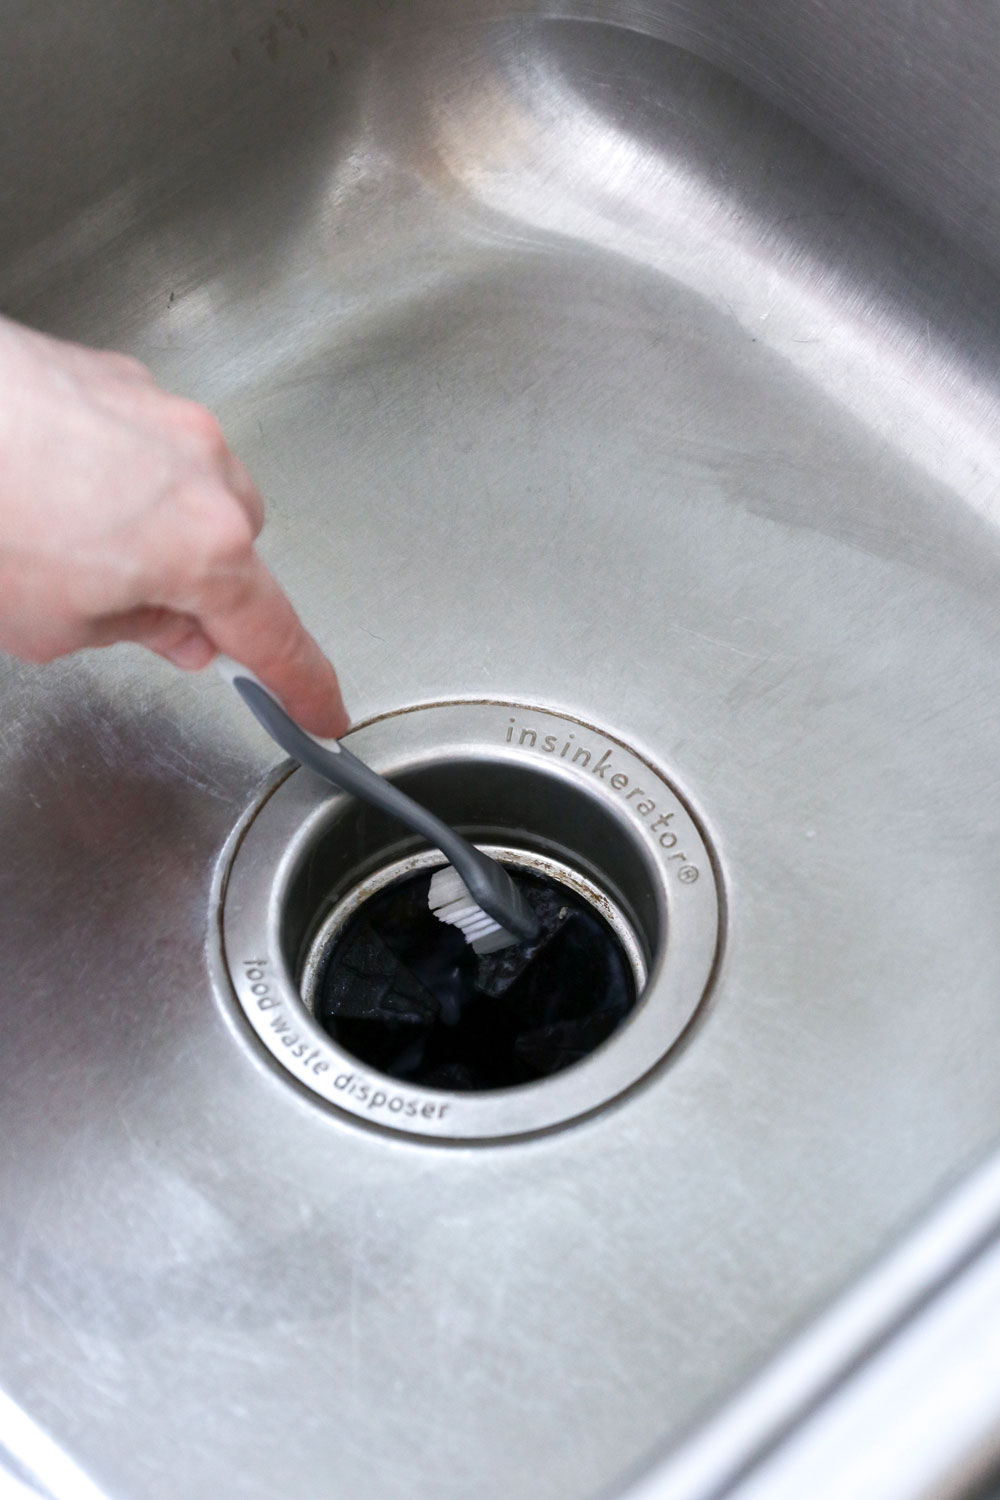 How to clean a garbage disposal